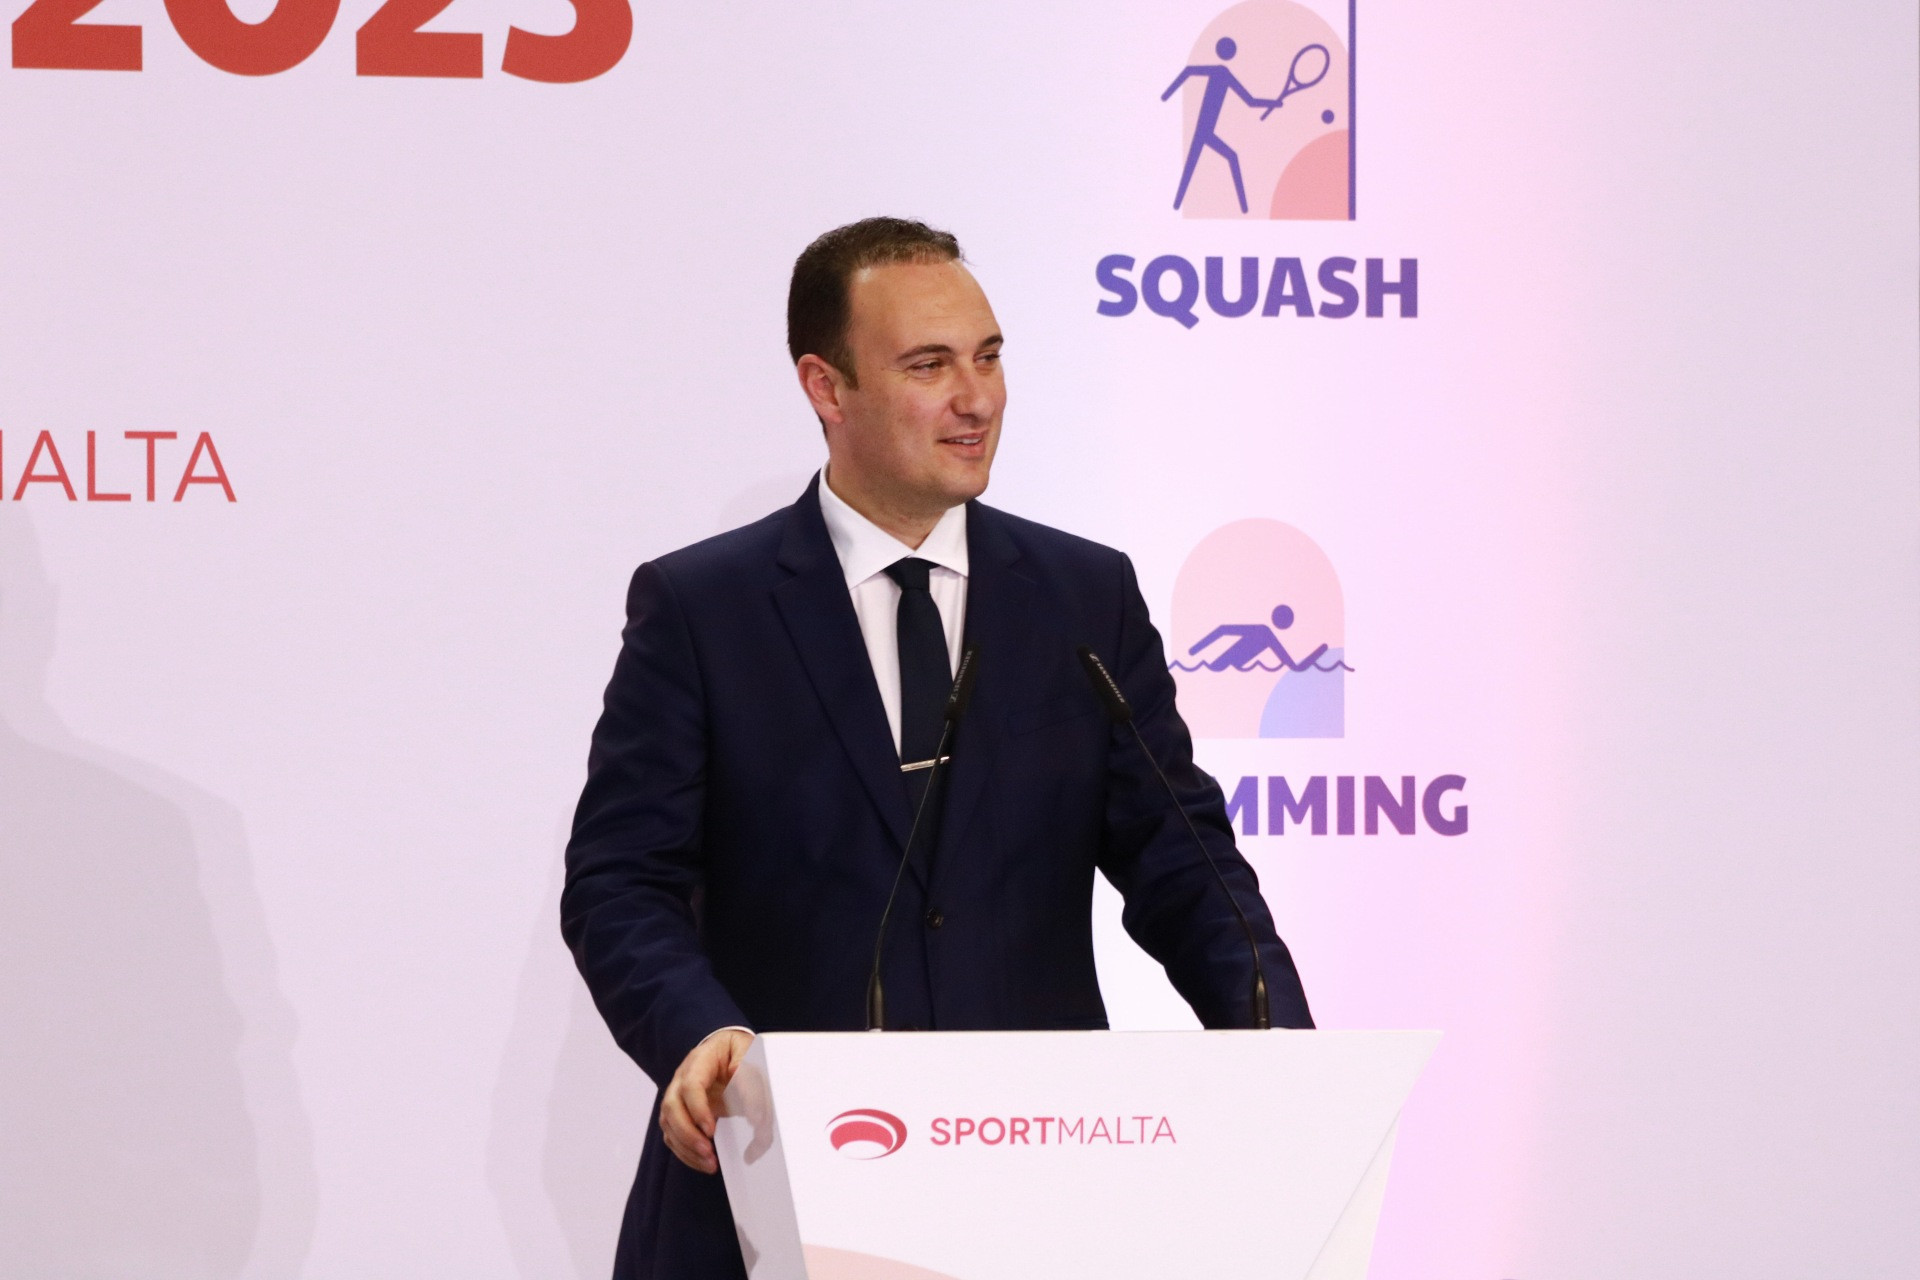 Malta's Minister for Education and Sport Clifton Grima revealed that the Government has invested in infrastructure and athletes' training schemes for the Games ©MOC